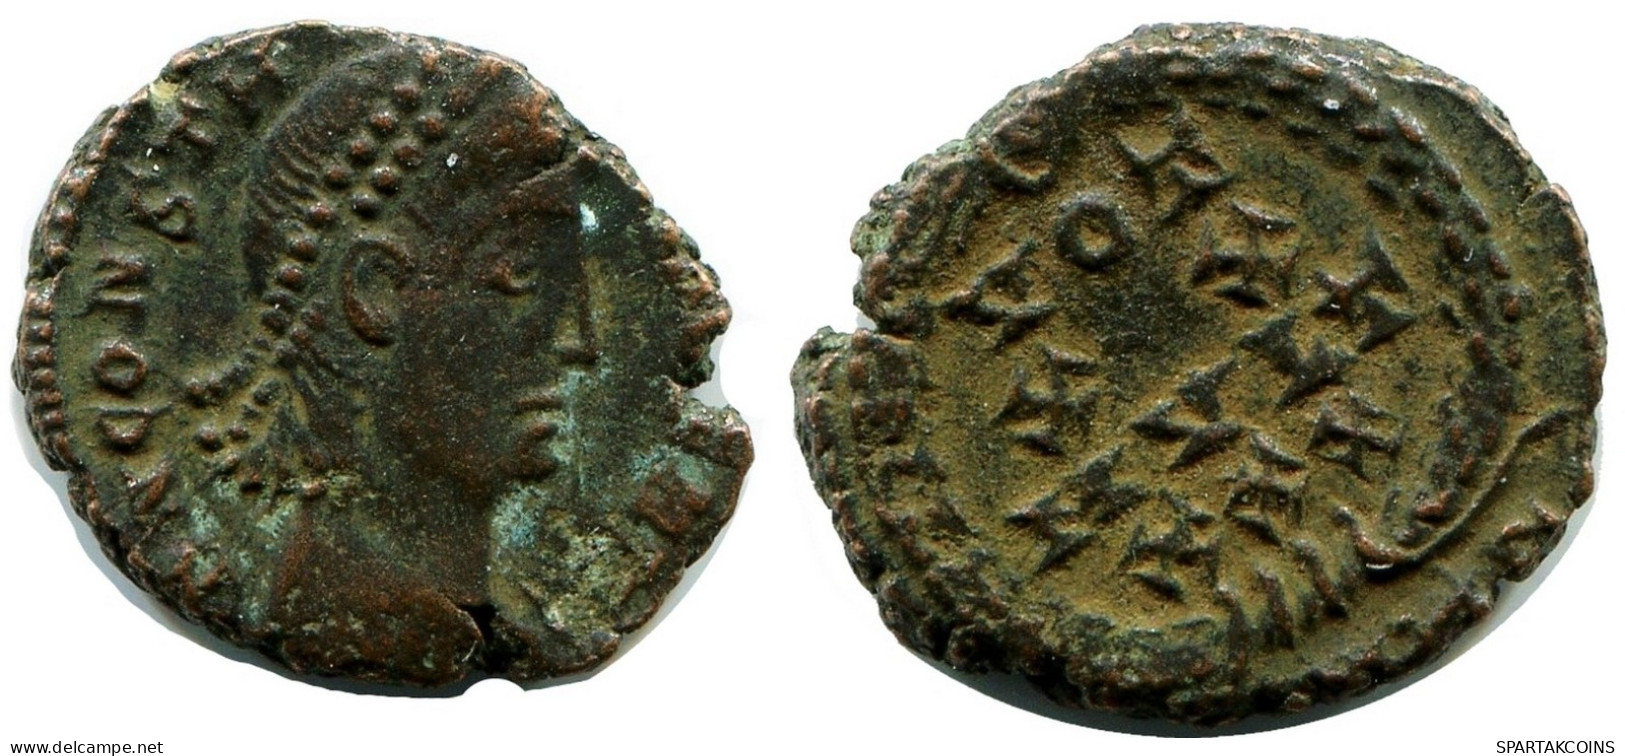 CONSTANS MINTED IN NICOMEDIA FROM THE ROYAL ONTARIO MUSEUM #ANC11745.14.F.A - L'Empire Chrétien (307 à 363)